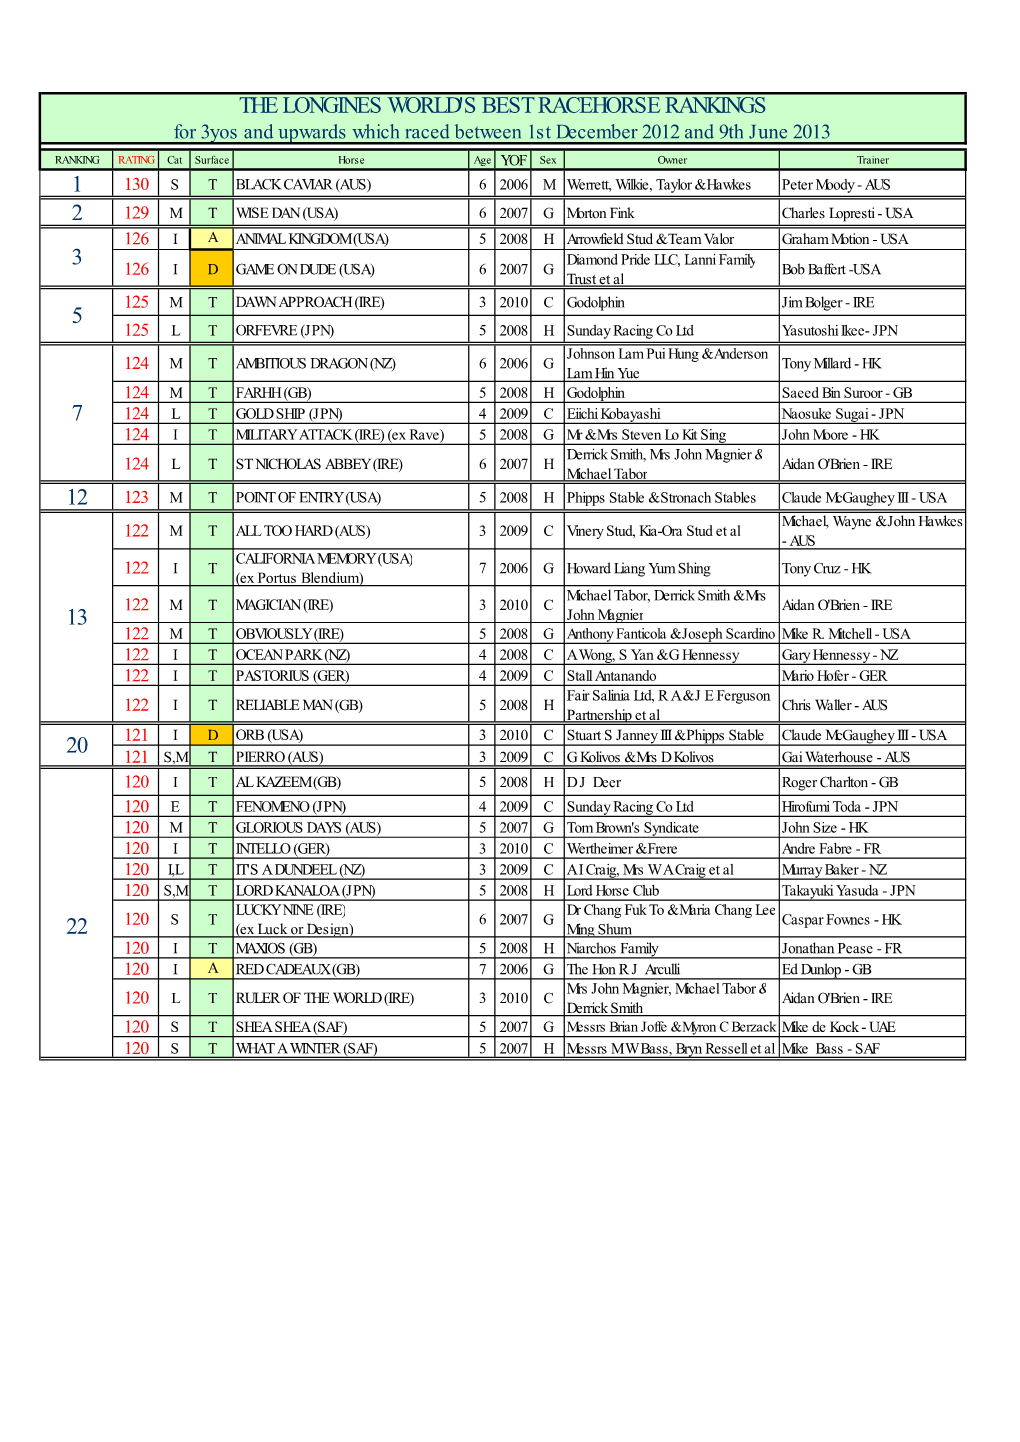 1 2 12 22 the Longines World's Best Racehorse Rankings 3